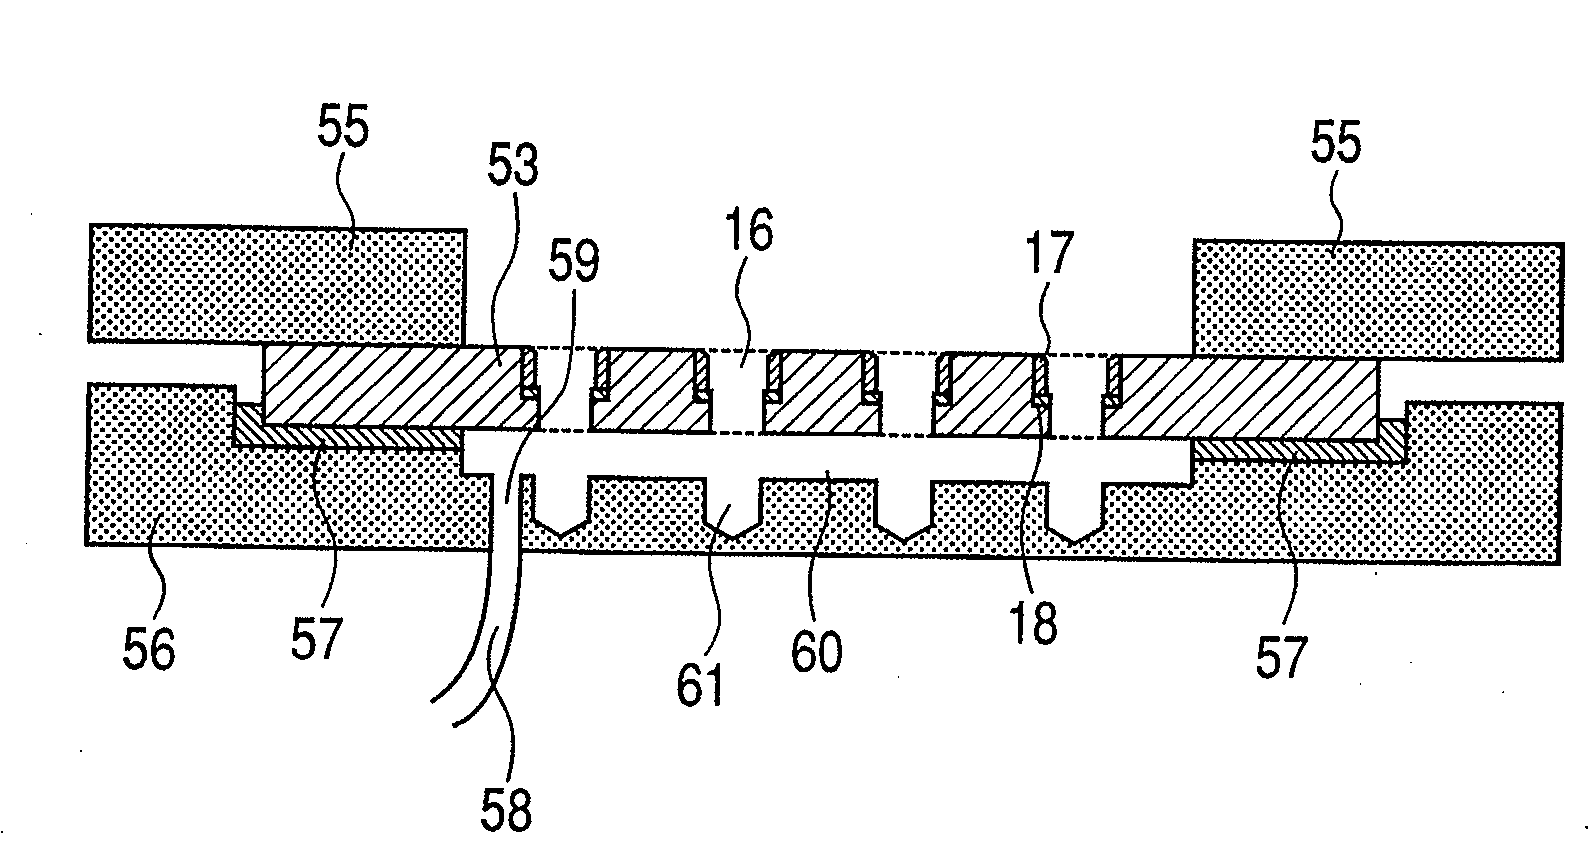 Cell array structural body and cell array